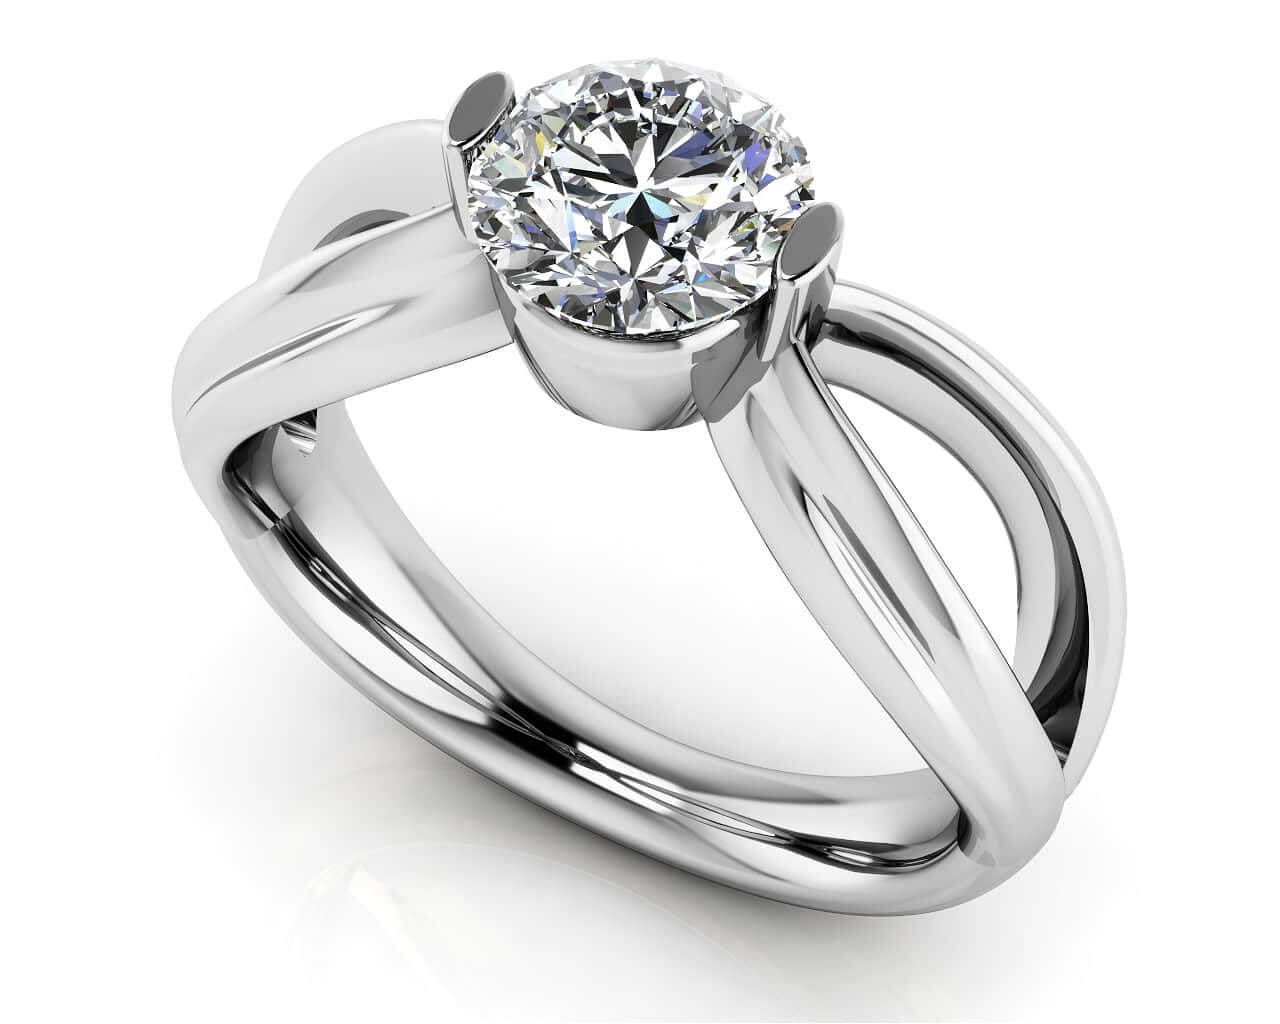 Endless Love Comfort Fit Diamond Solitaire Ring 1/2 Carat Total Weight